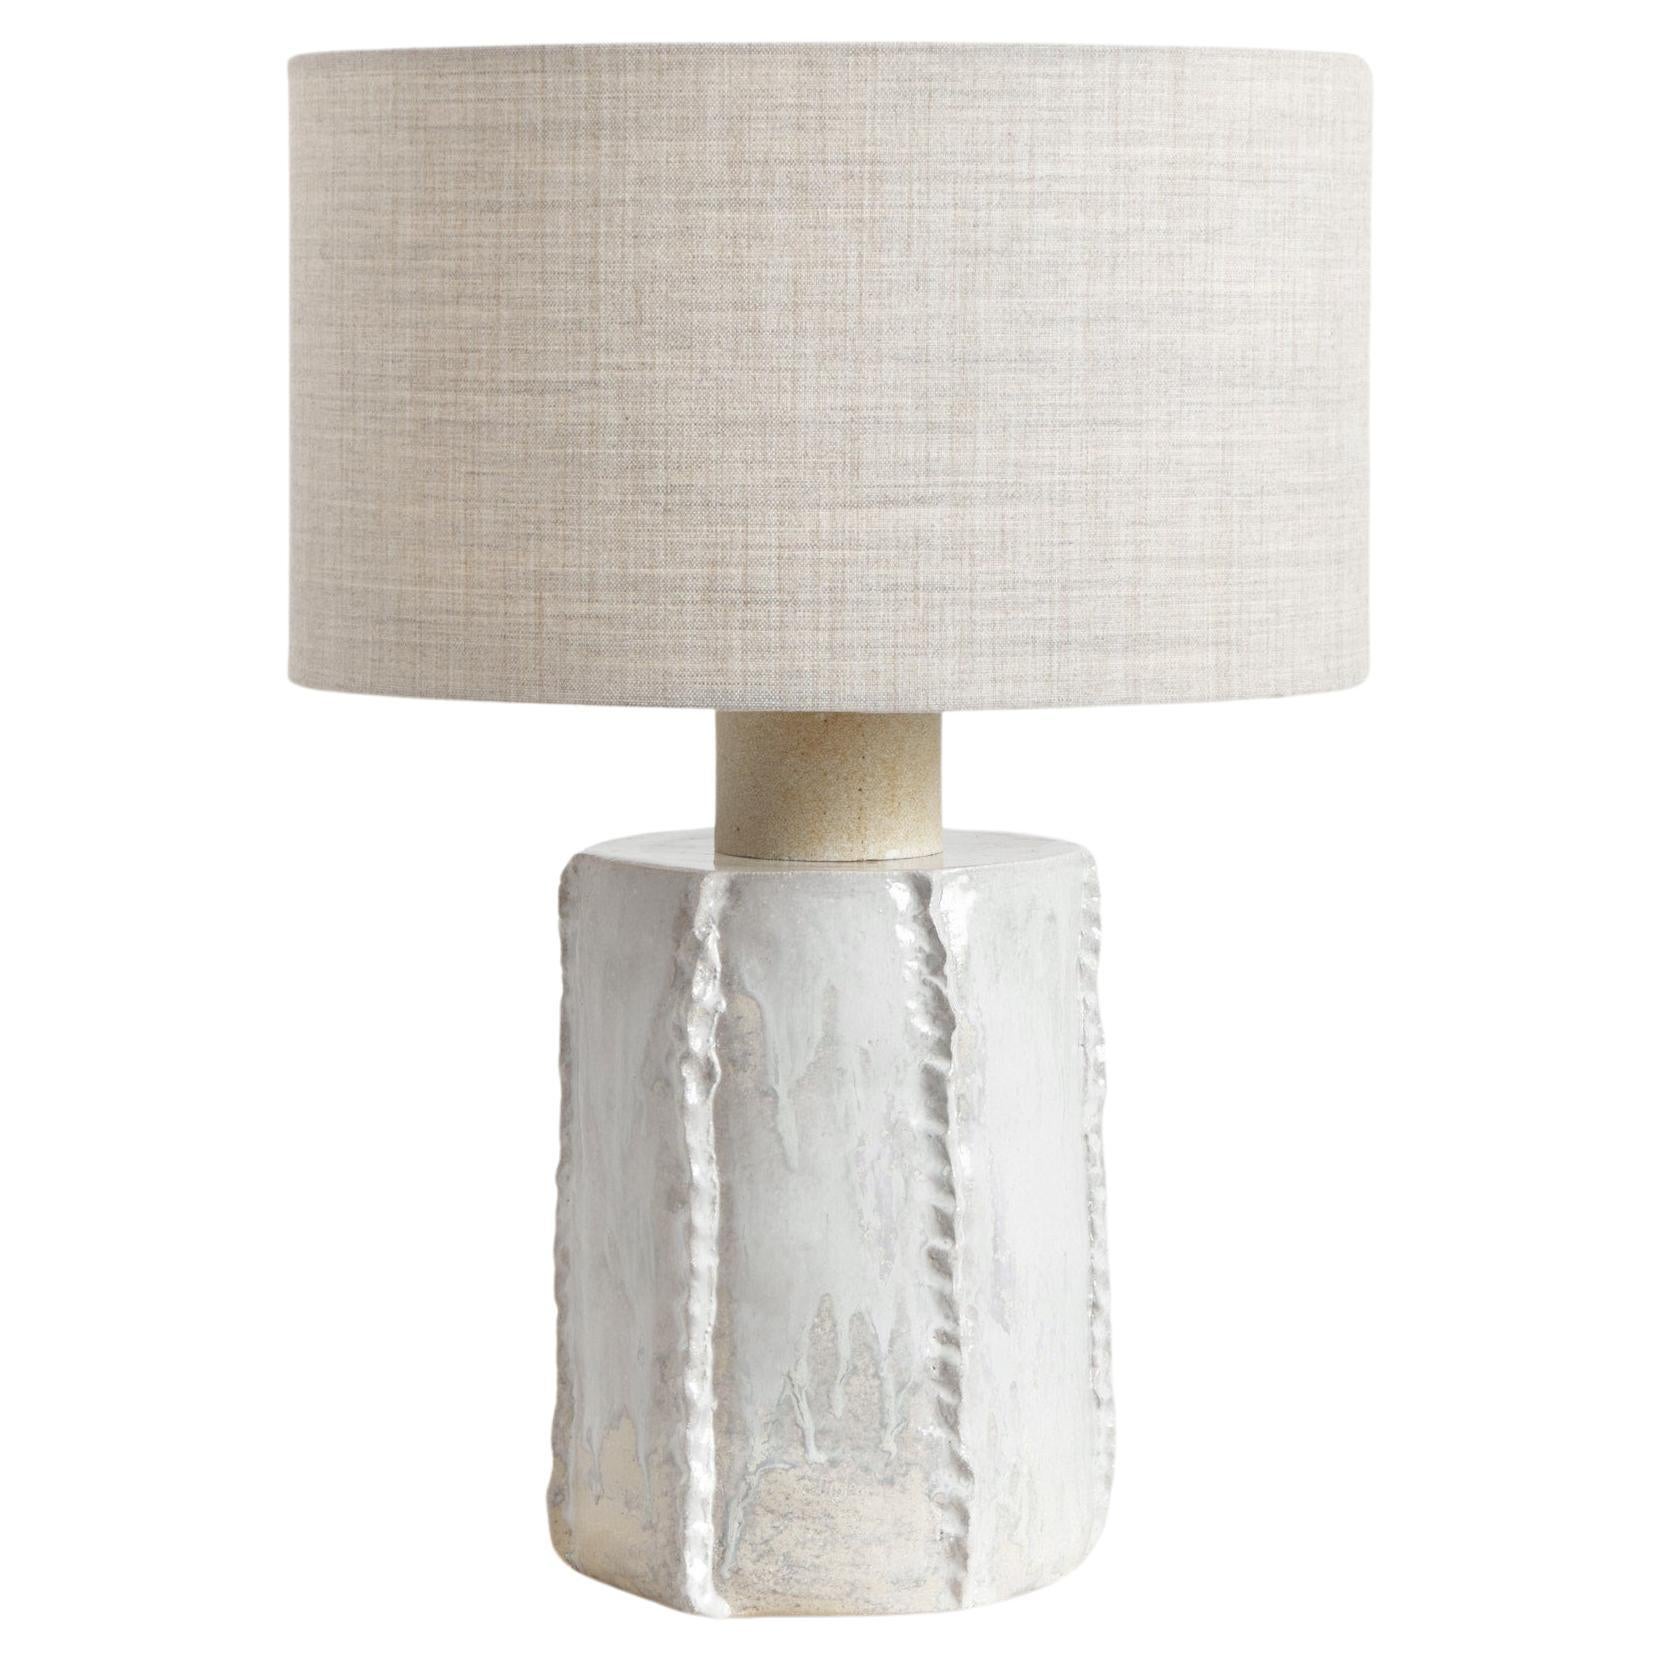 Totem Table Light (white) For Sale